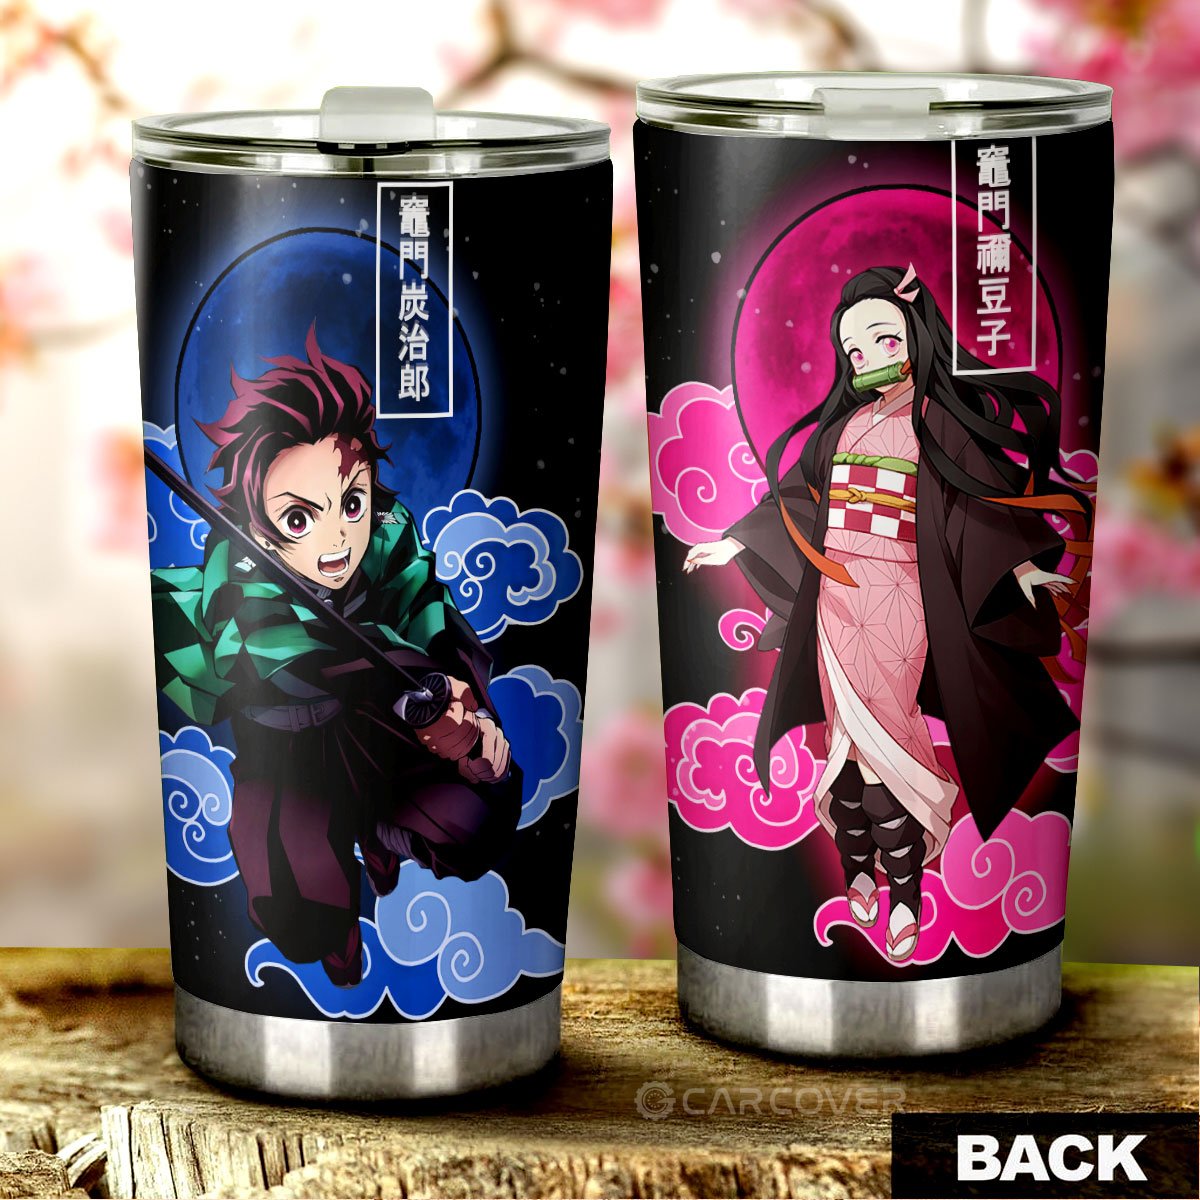 Tanjiro And Nezuko Tumbler Cup Custom Anime Demon Slayer Car Accessories Perfect Gift For Fan - Gearcarcover - 1